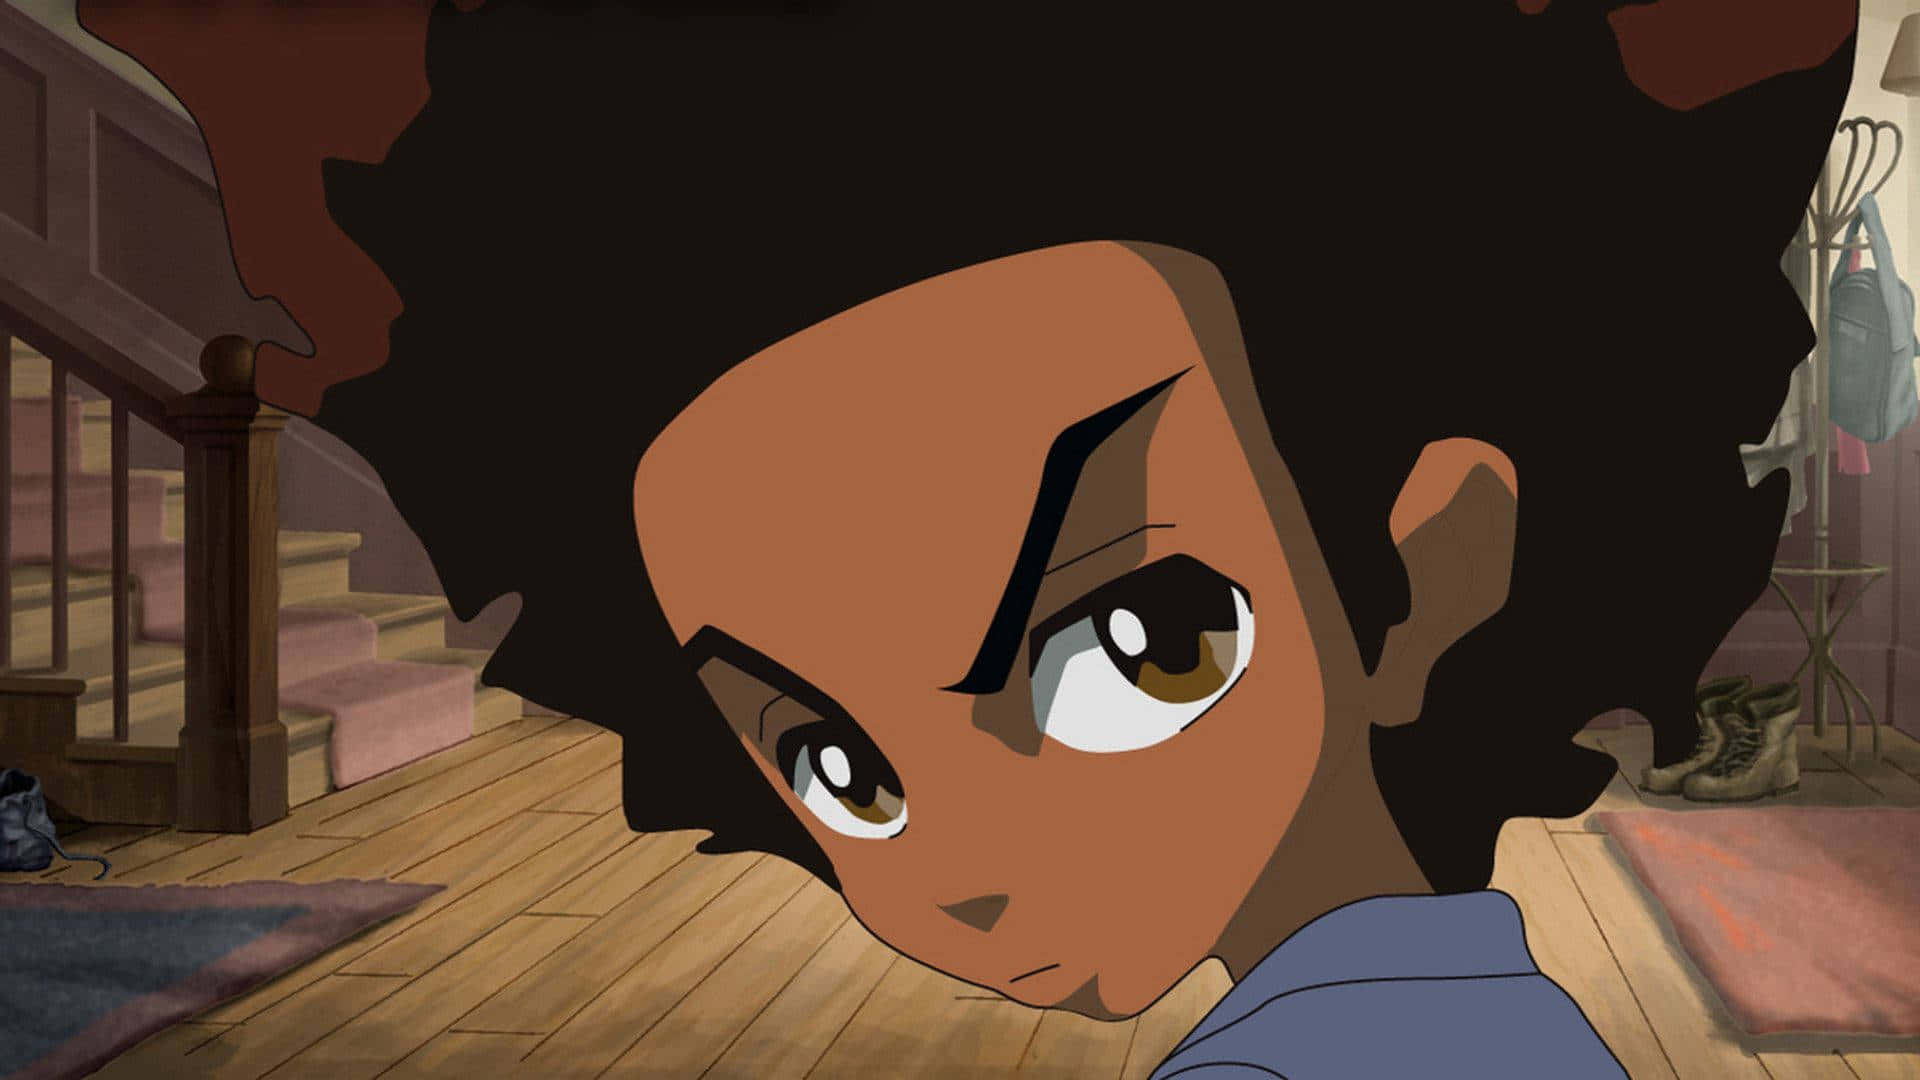 A Cartoon Character With Afro Hair Standing In A Room